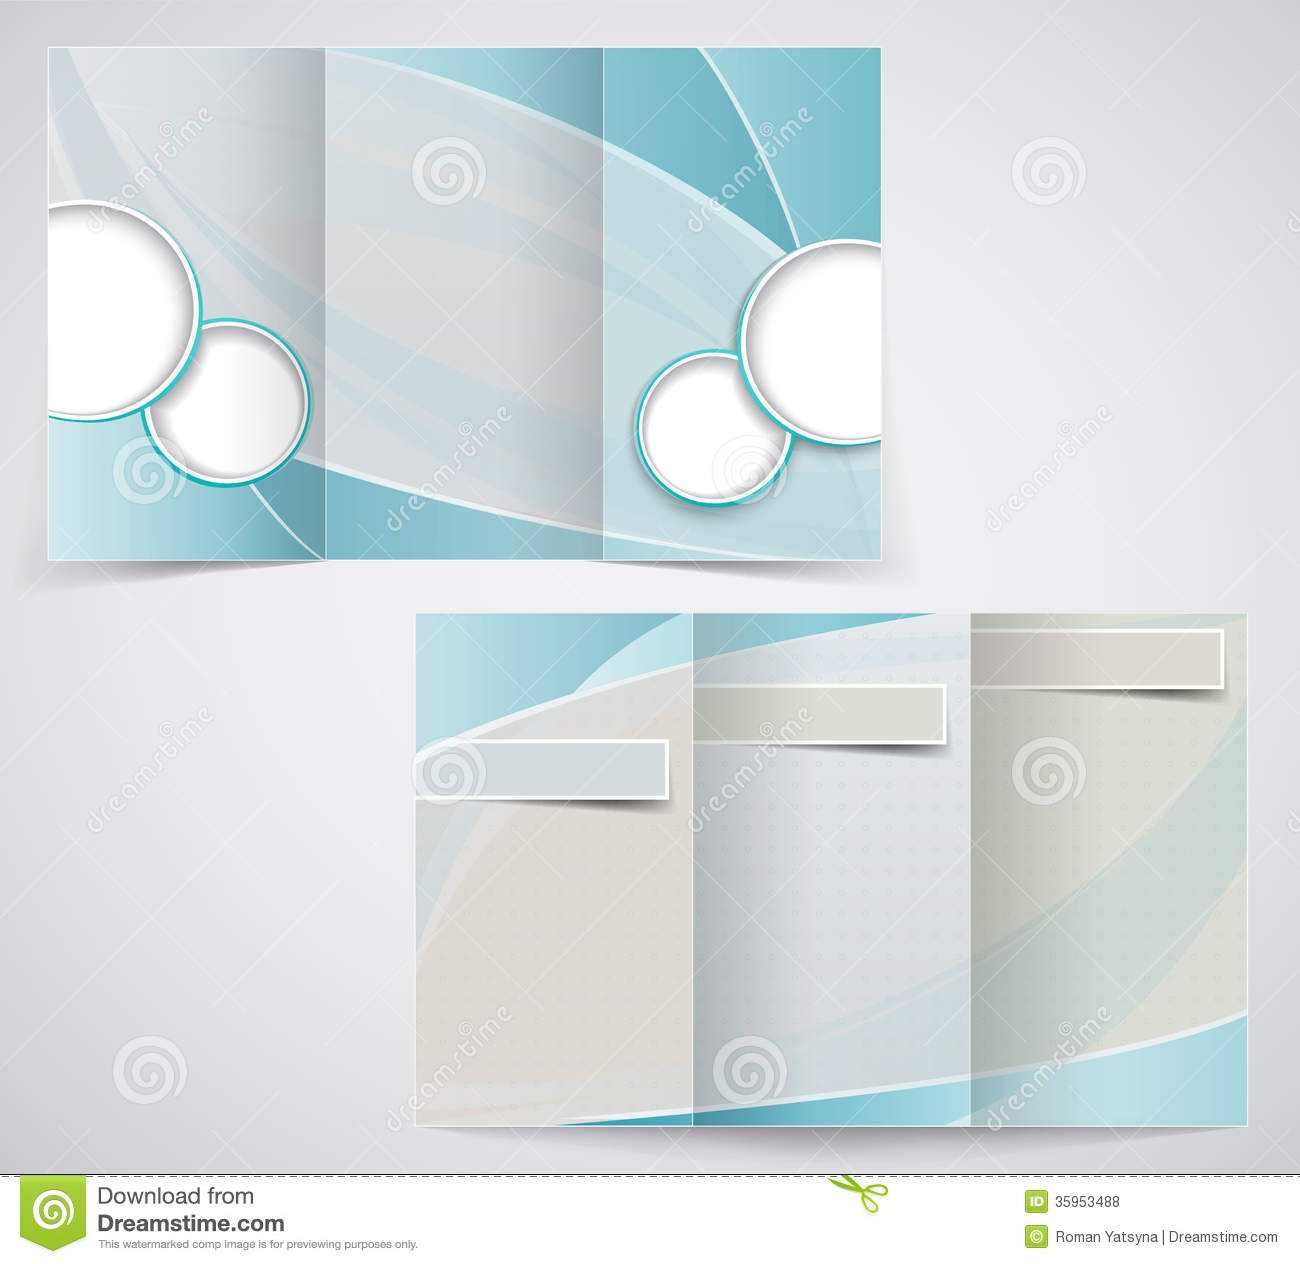 Tri Fold Business Brochure Template, Vector Blue D Stock Pertaining To Free Brochure Template Downloads